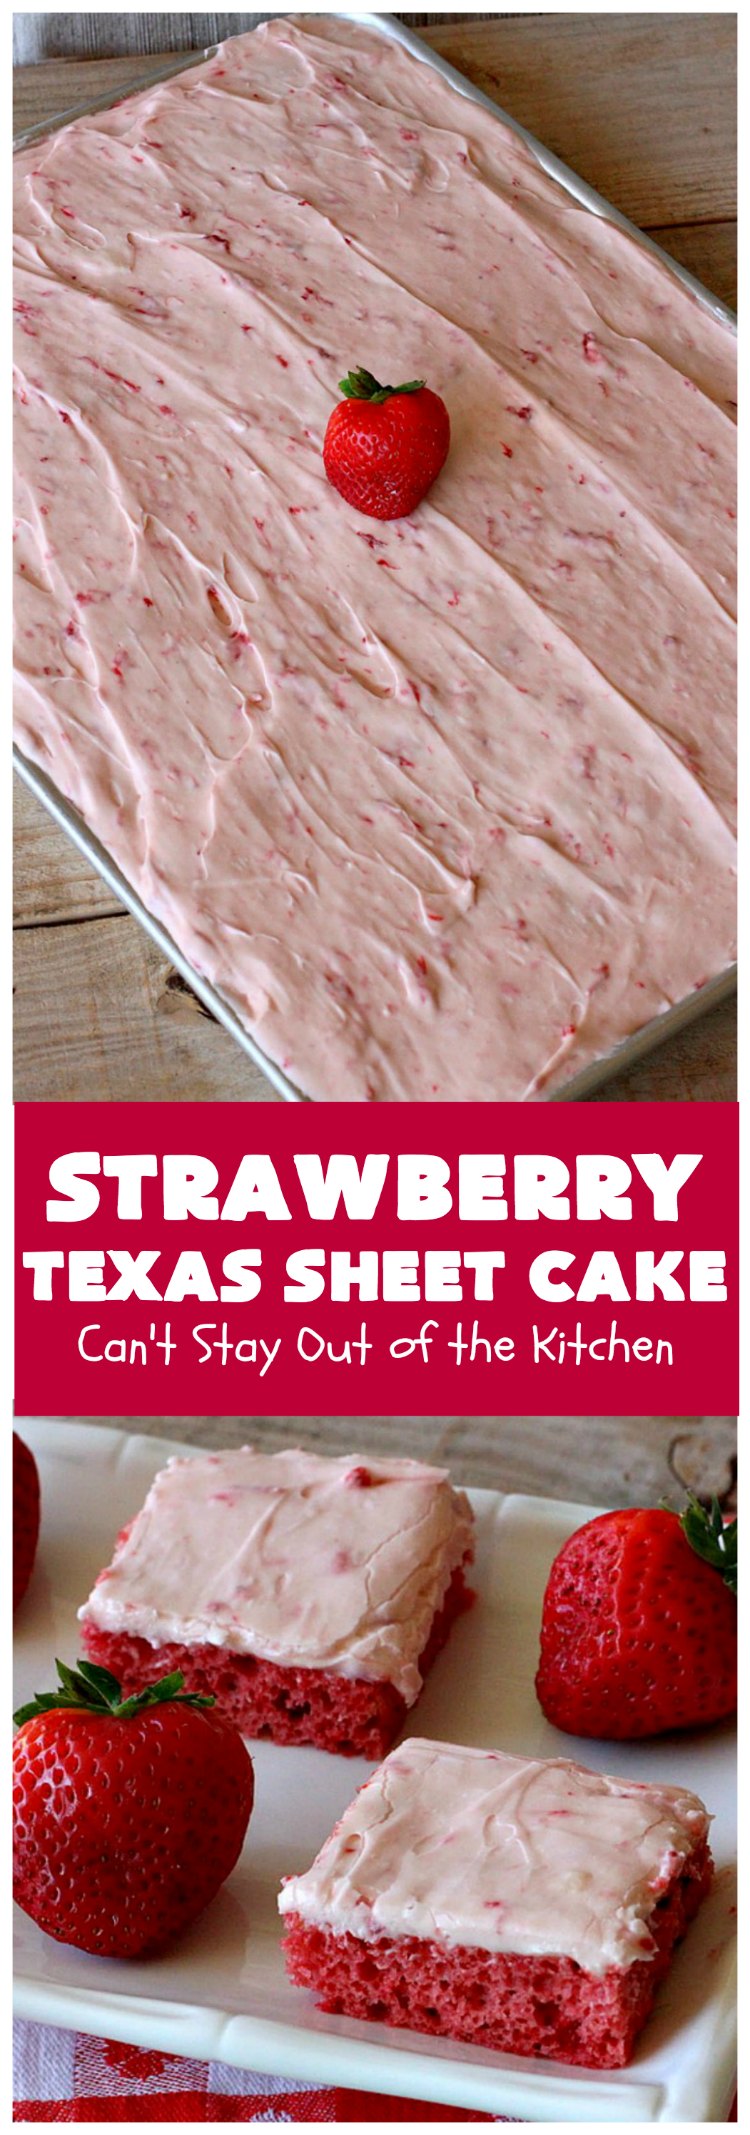 Strawberry Texas Sheet Cake | Can't Stay Out of the Kitchen | this amazing #dessert will have you drooling from the first bite! The #CreamCheese icing is fantastic. Perfect #cake for company or #holidays because it feeds a crowd and everyone wants seconds! #SheetCake #TexasSheetCake #strawberries #StrawberryTexasSheetCake #HolidayDessert #Christmas #ValentinesDay